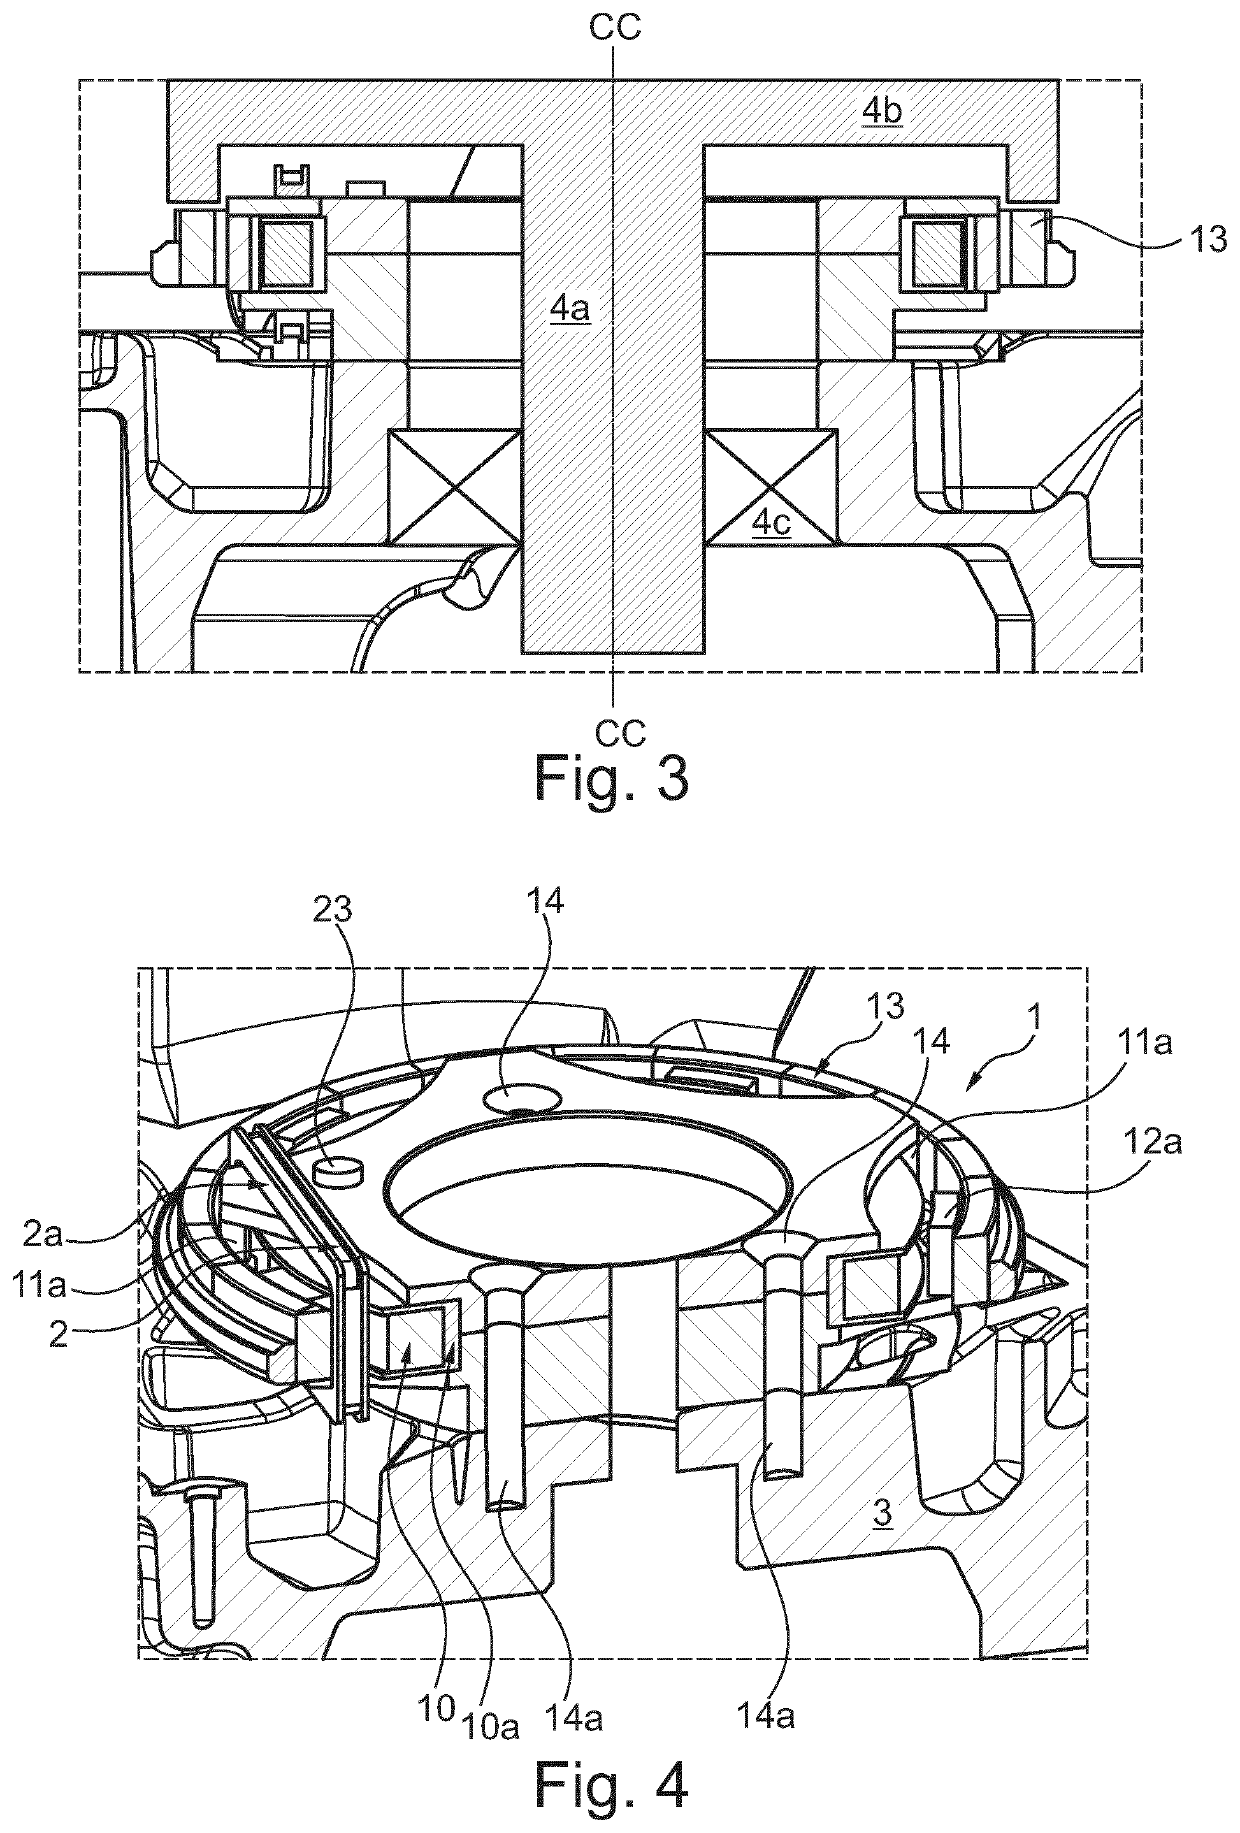 Crankshaft driven flywheel magneto generator with circular winding for power supply in handheld batteryless combustion engines